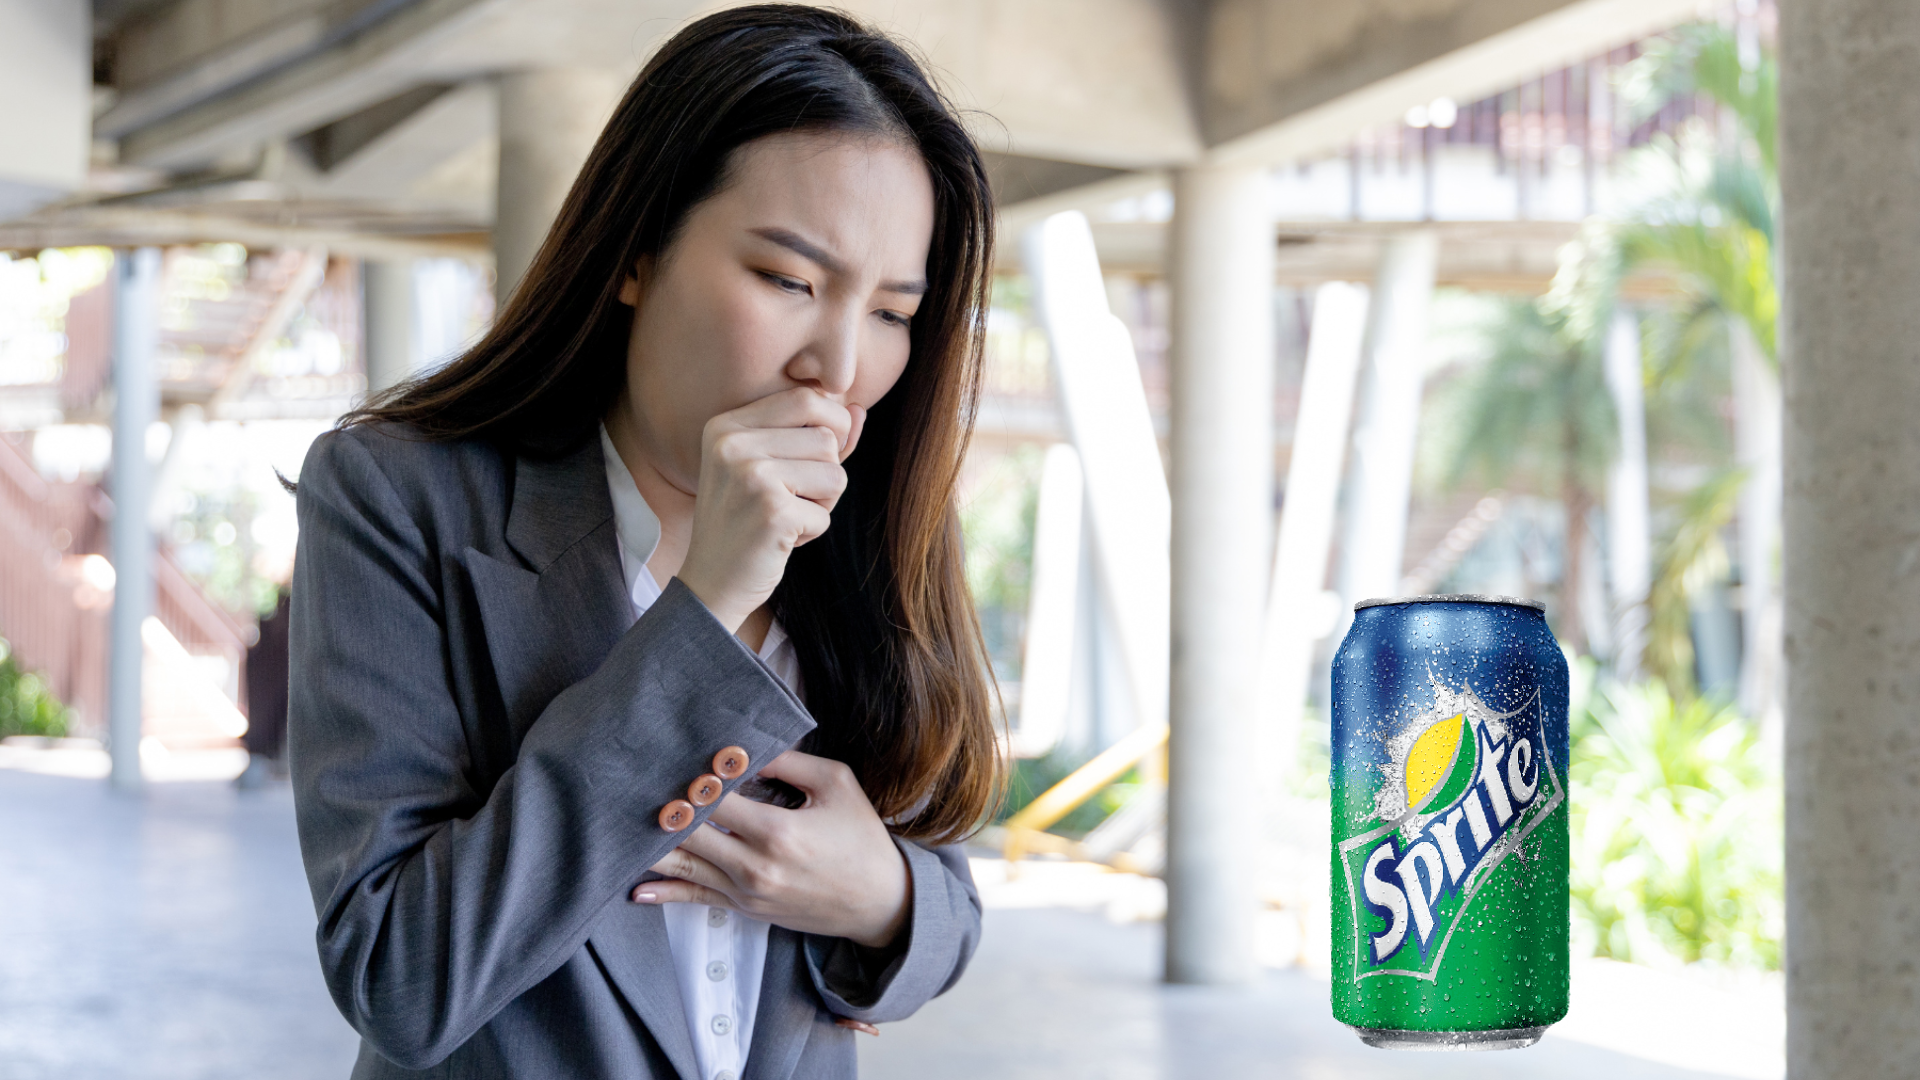 girl with sore throat with sprite can on her left side